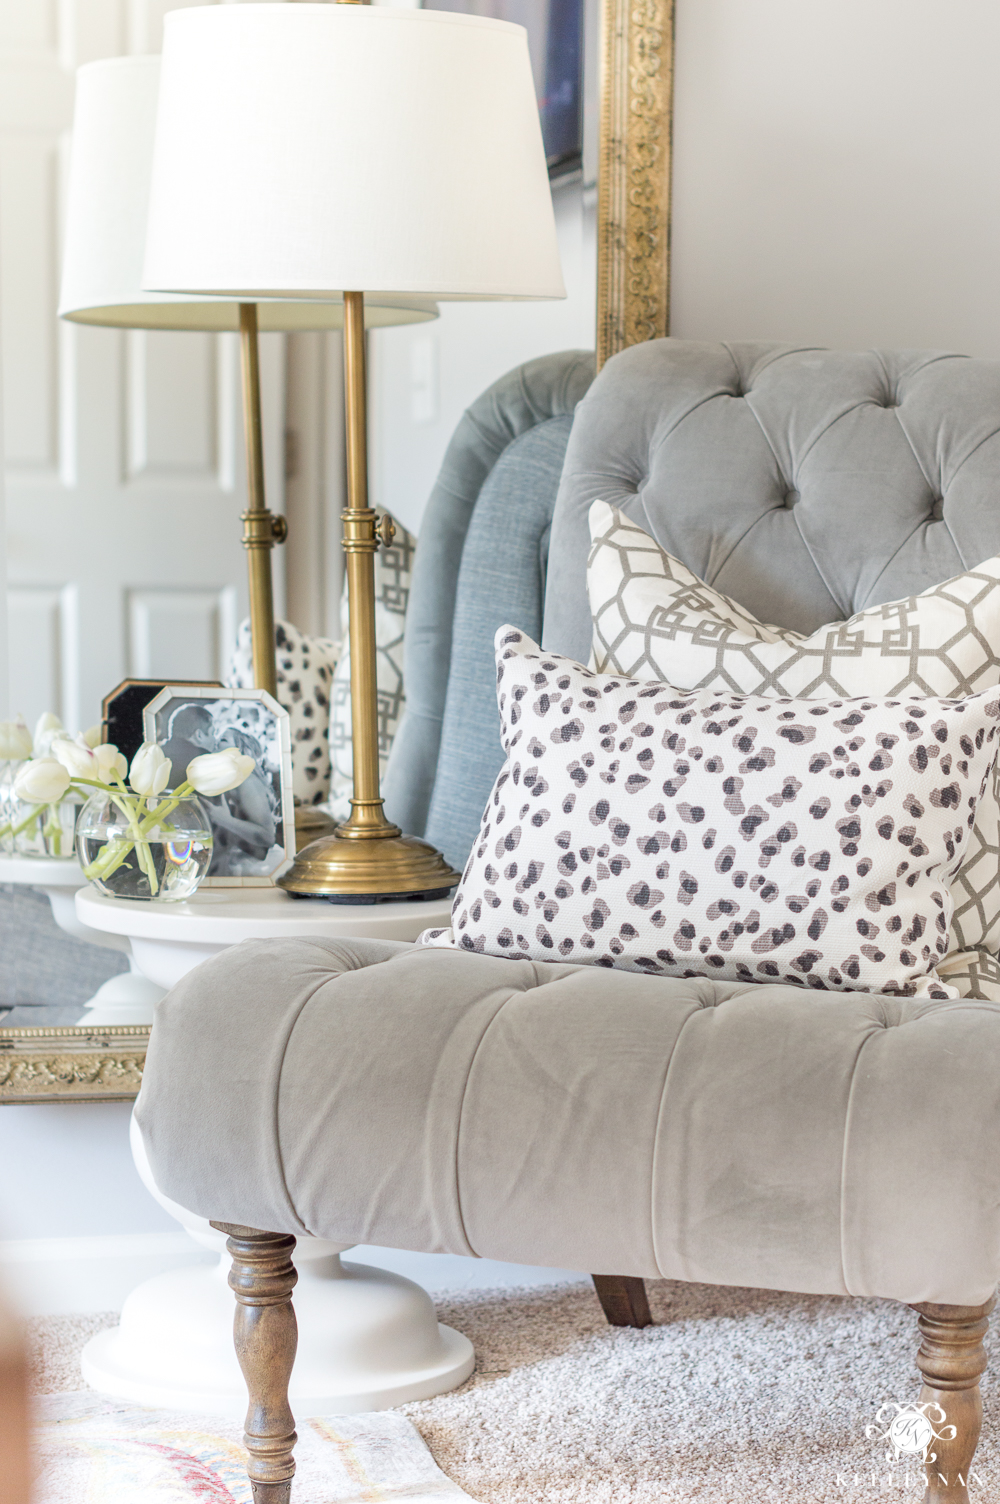 Tufted Gray Slipper Chair with Layered Patterned Pillows